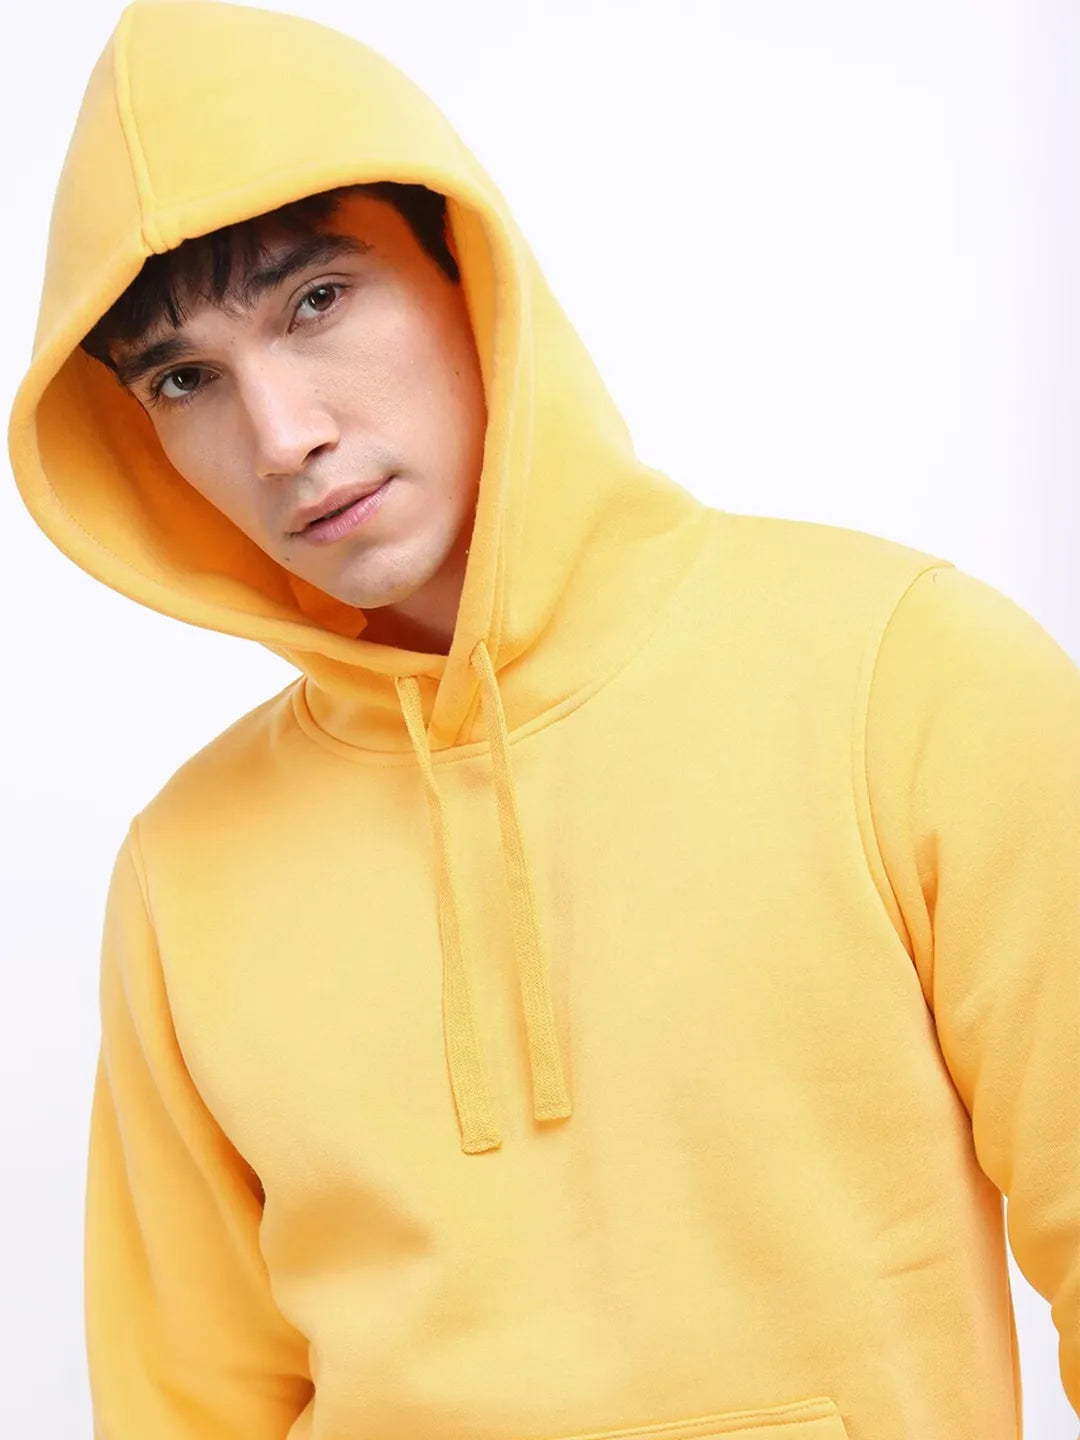 Unisex Hoodie for Men and Women Yellow Color Full Sleeves